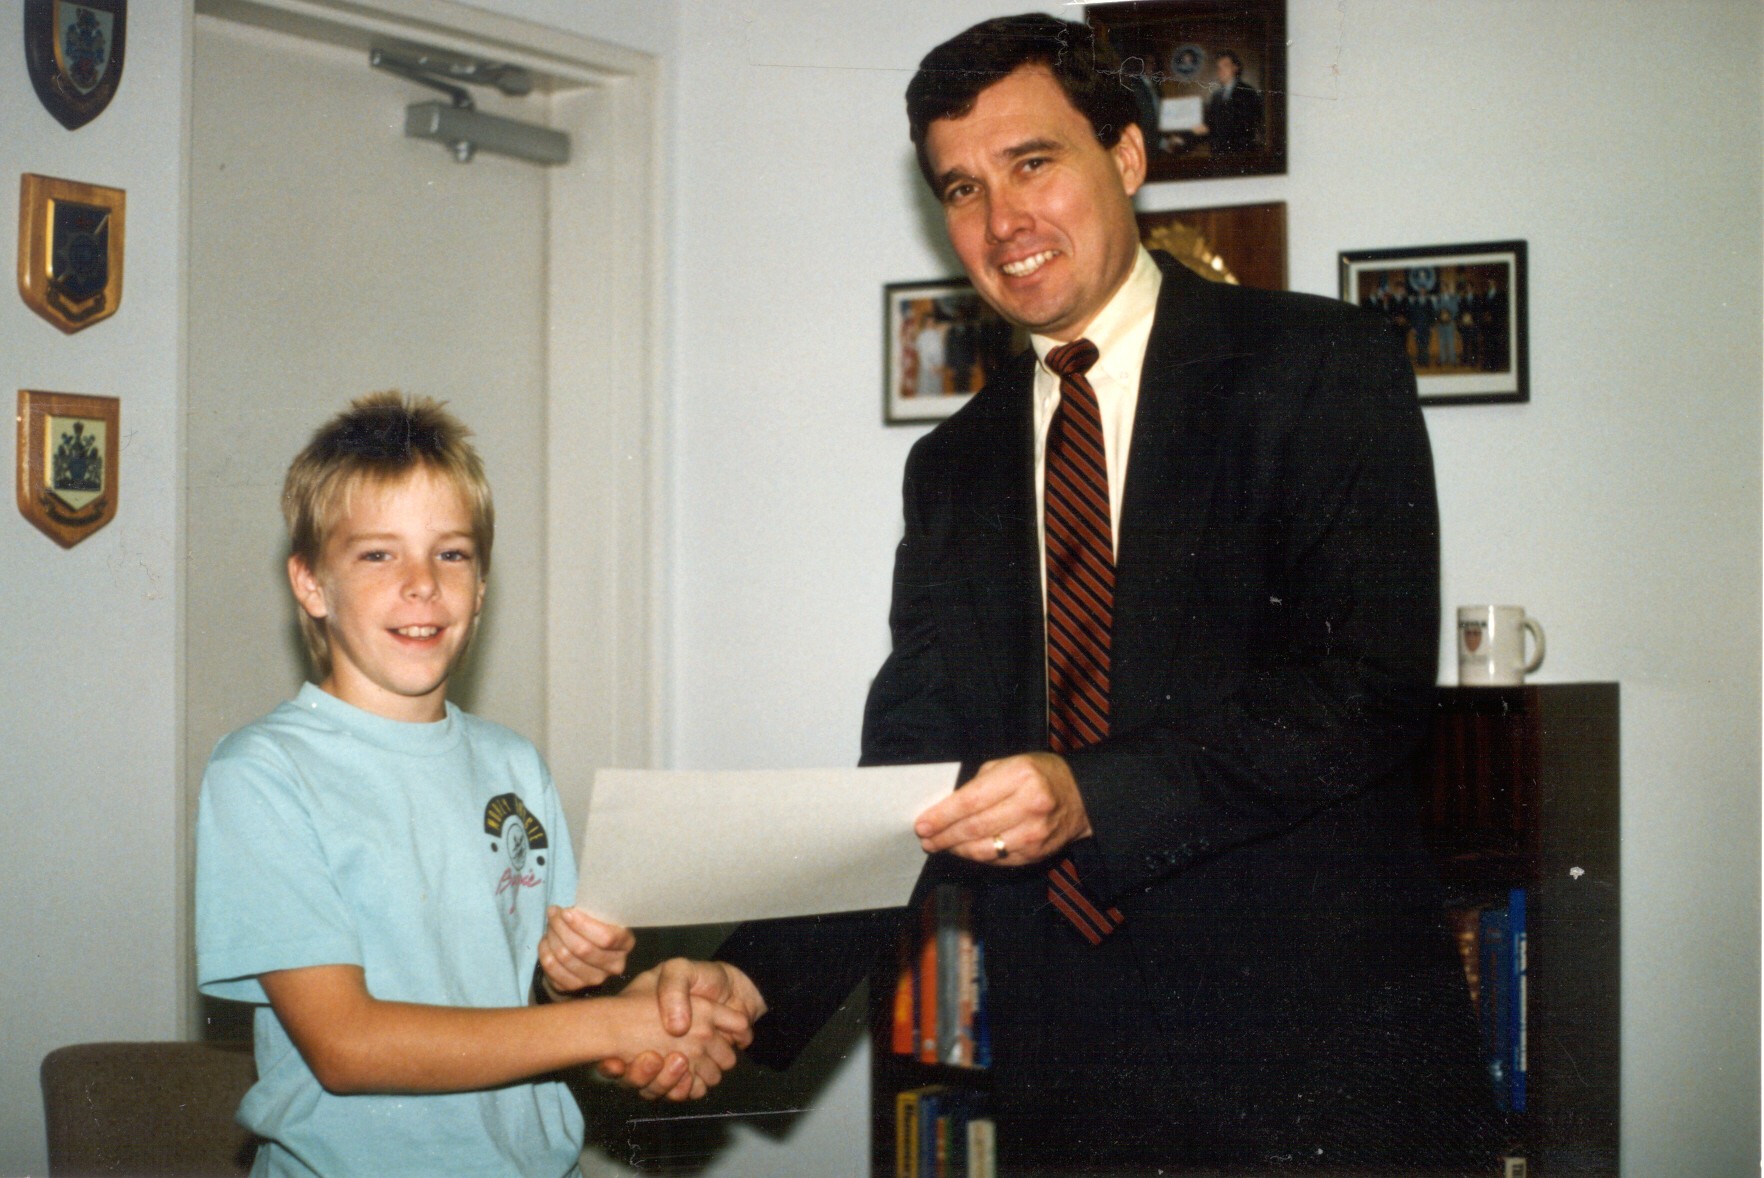 Photo of Kerlikowske presenting a certificate to a youngster chosen as Police Chief for a Day